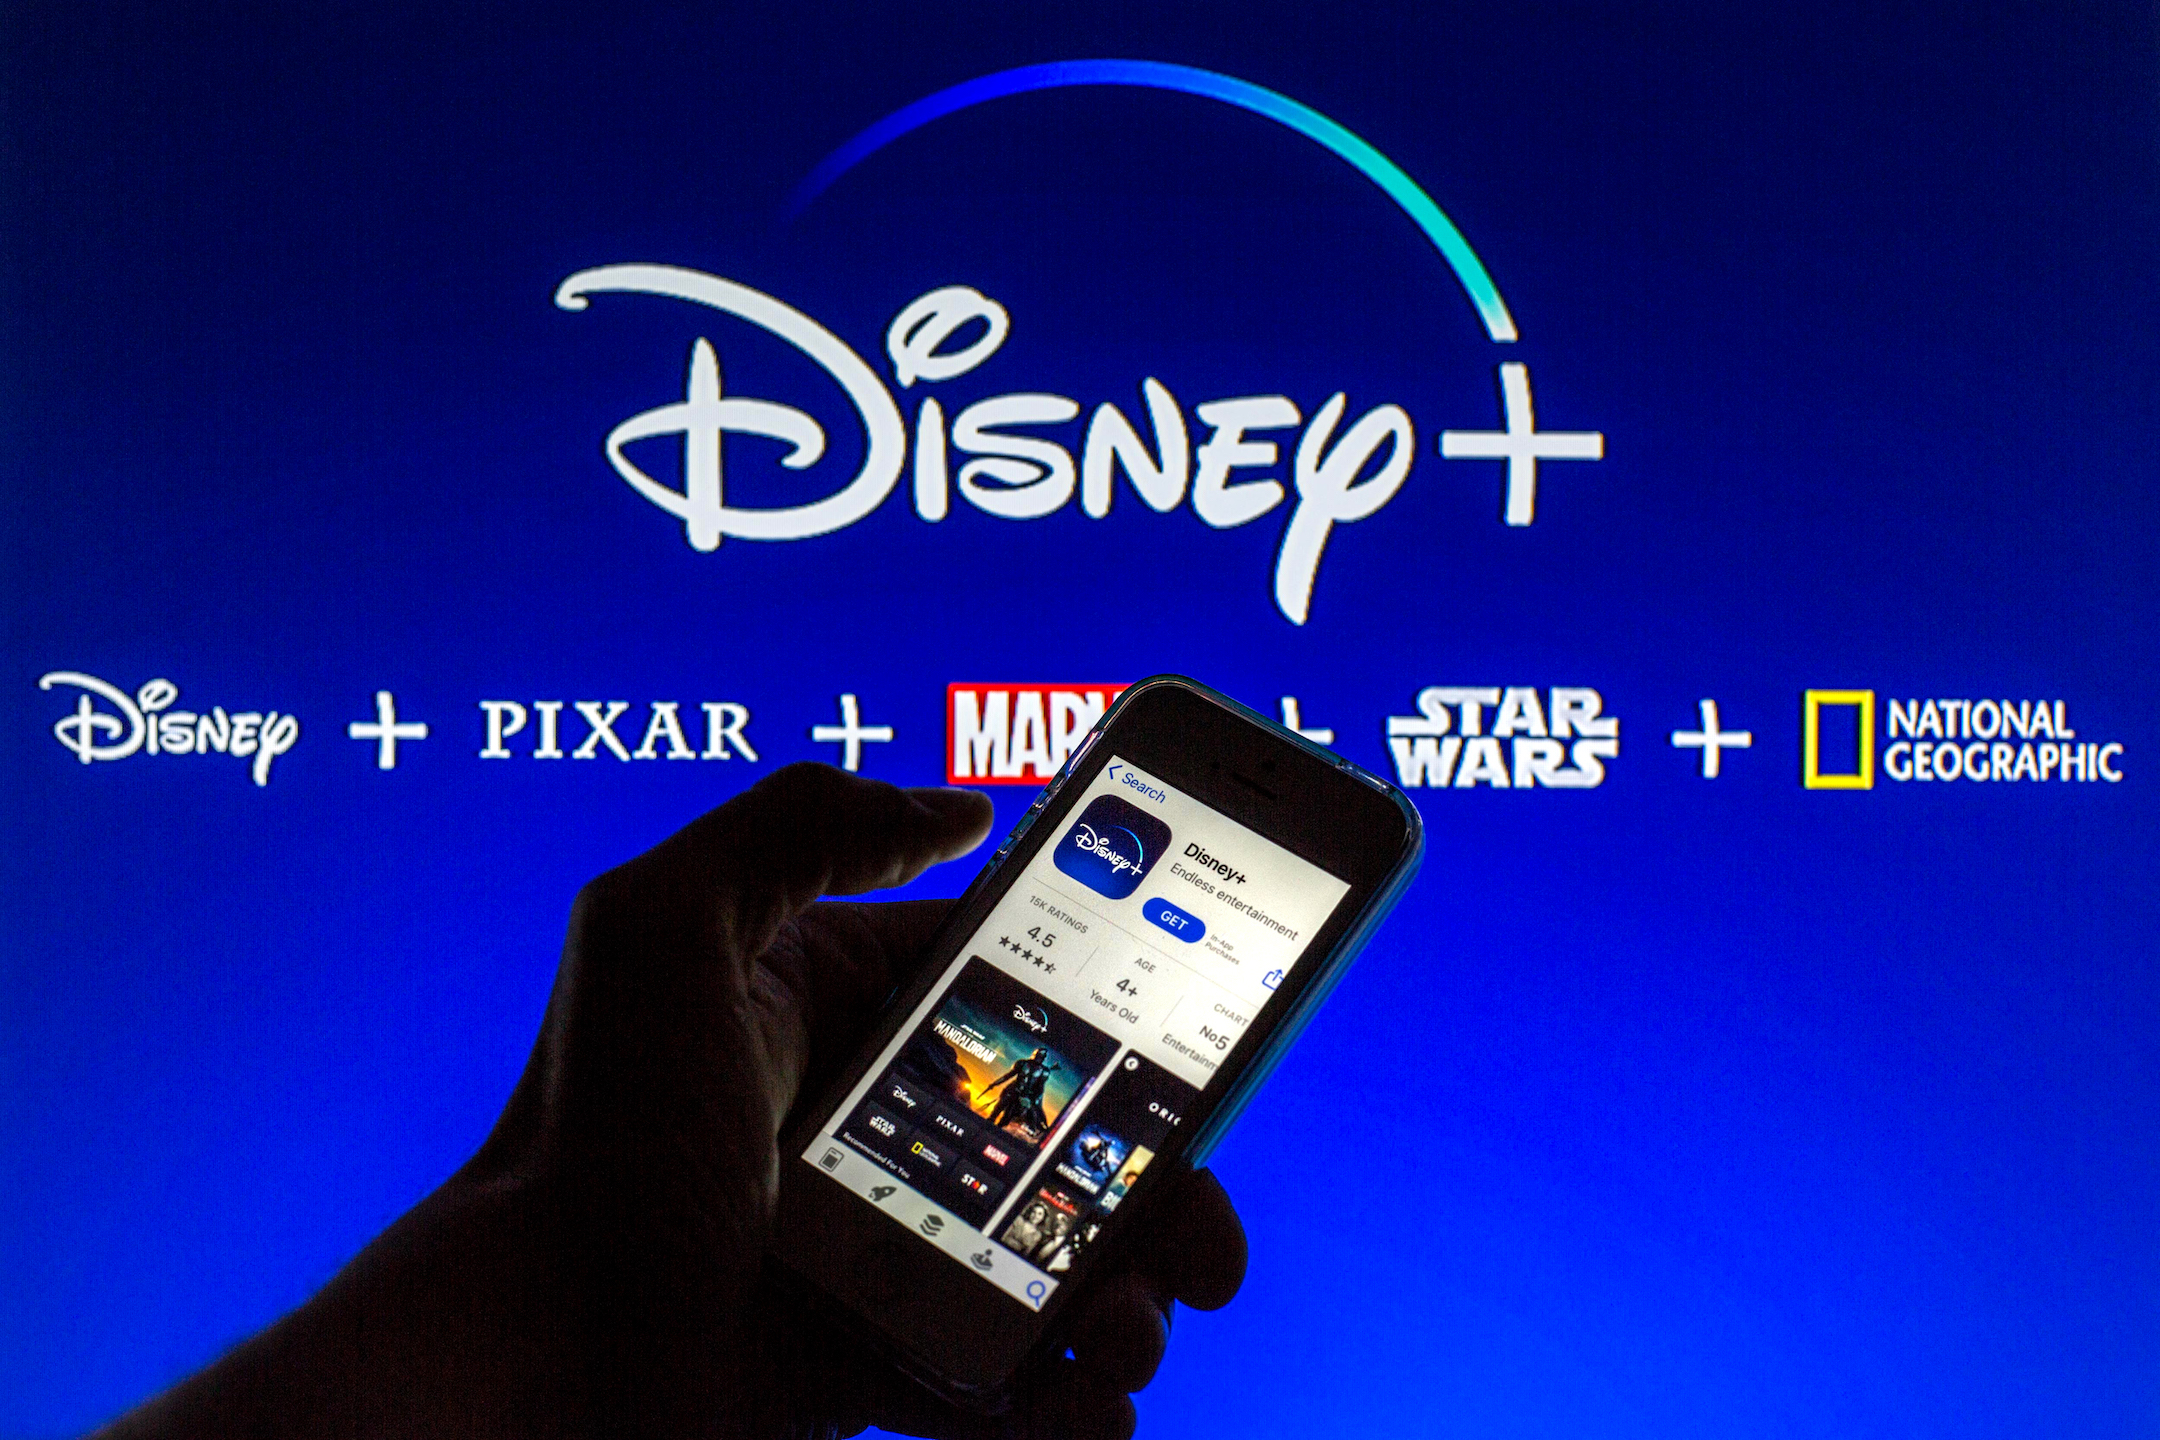 Disney+ logo shows the collection of Disney+ day genres and movies